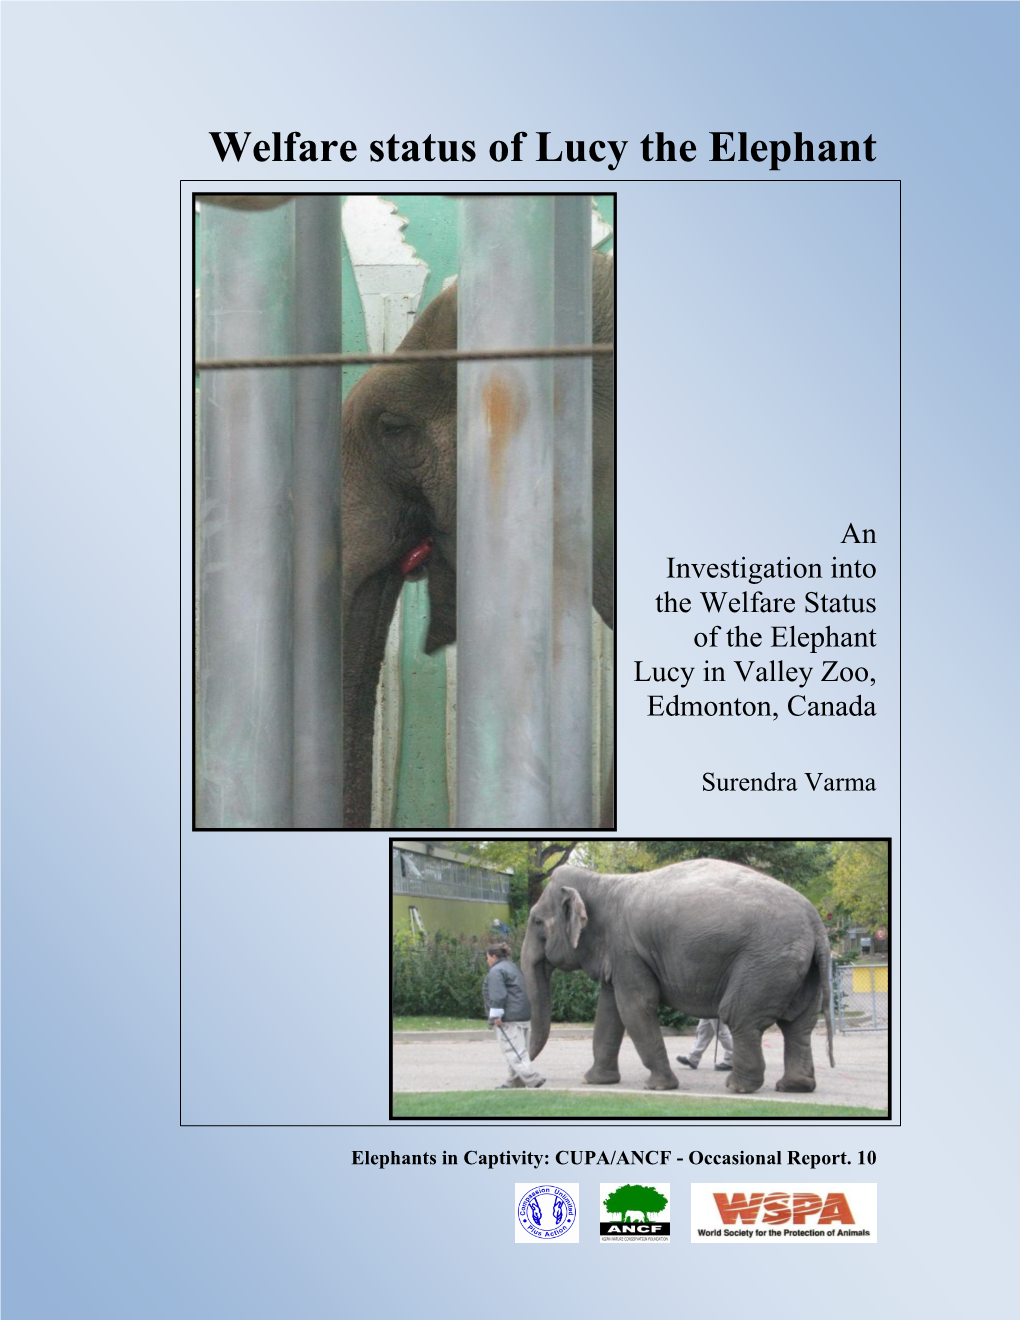 Lucy Welfare Status, Later I Consulted Other Zoo Veterinarians and Elephant Experts for Their Critical Opinion on the Findings and the Conclusions Arrived At